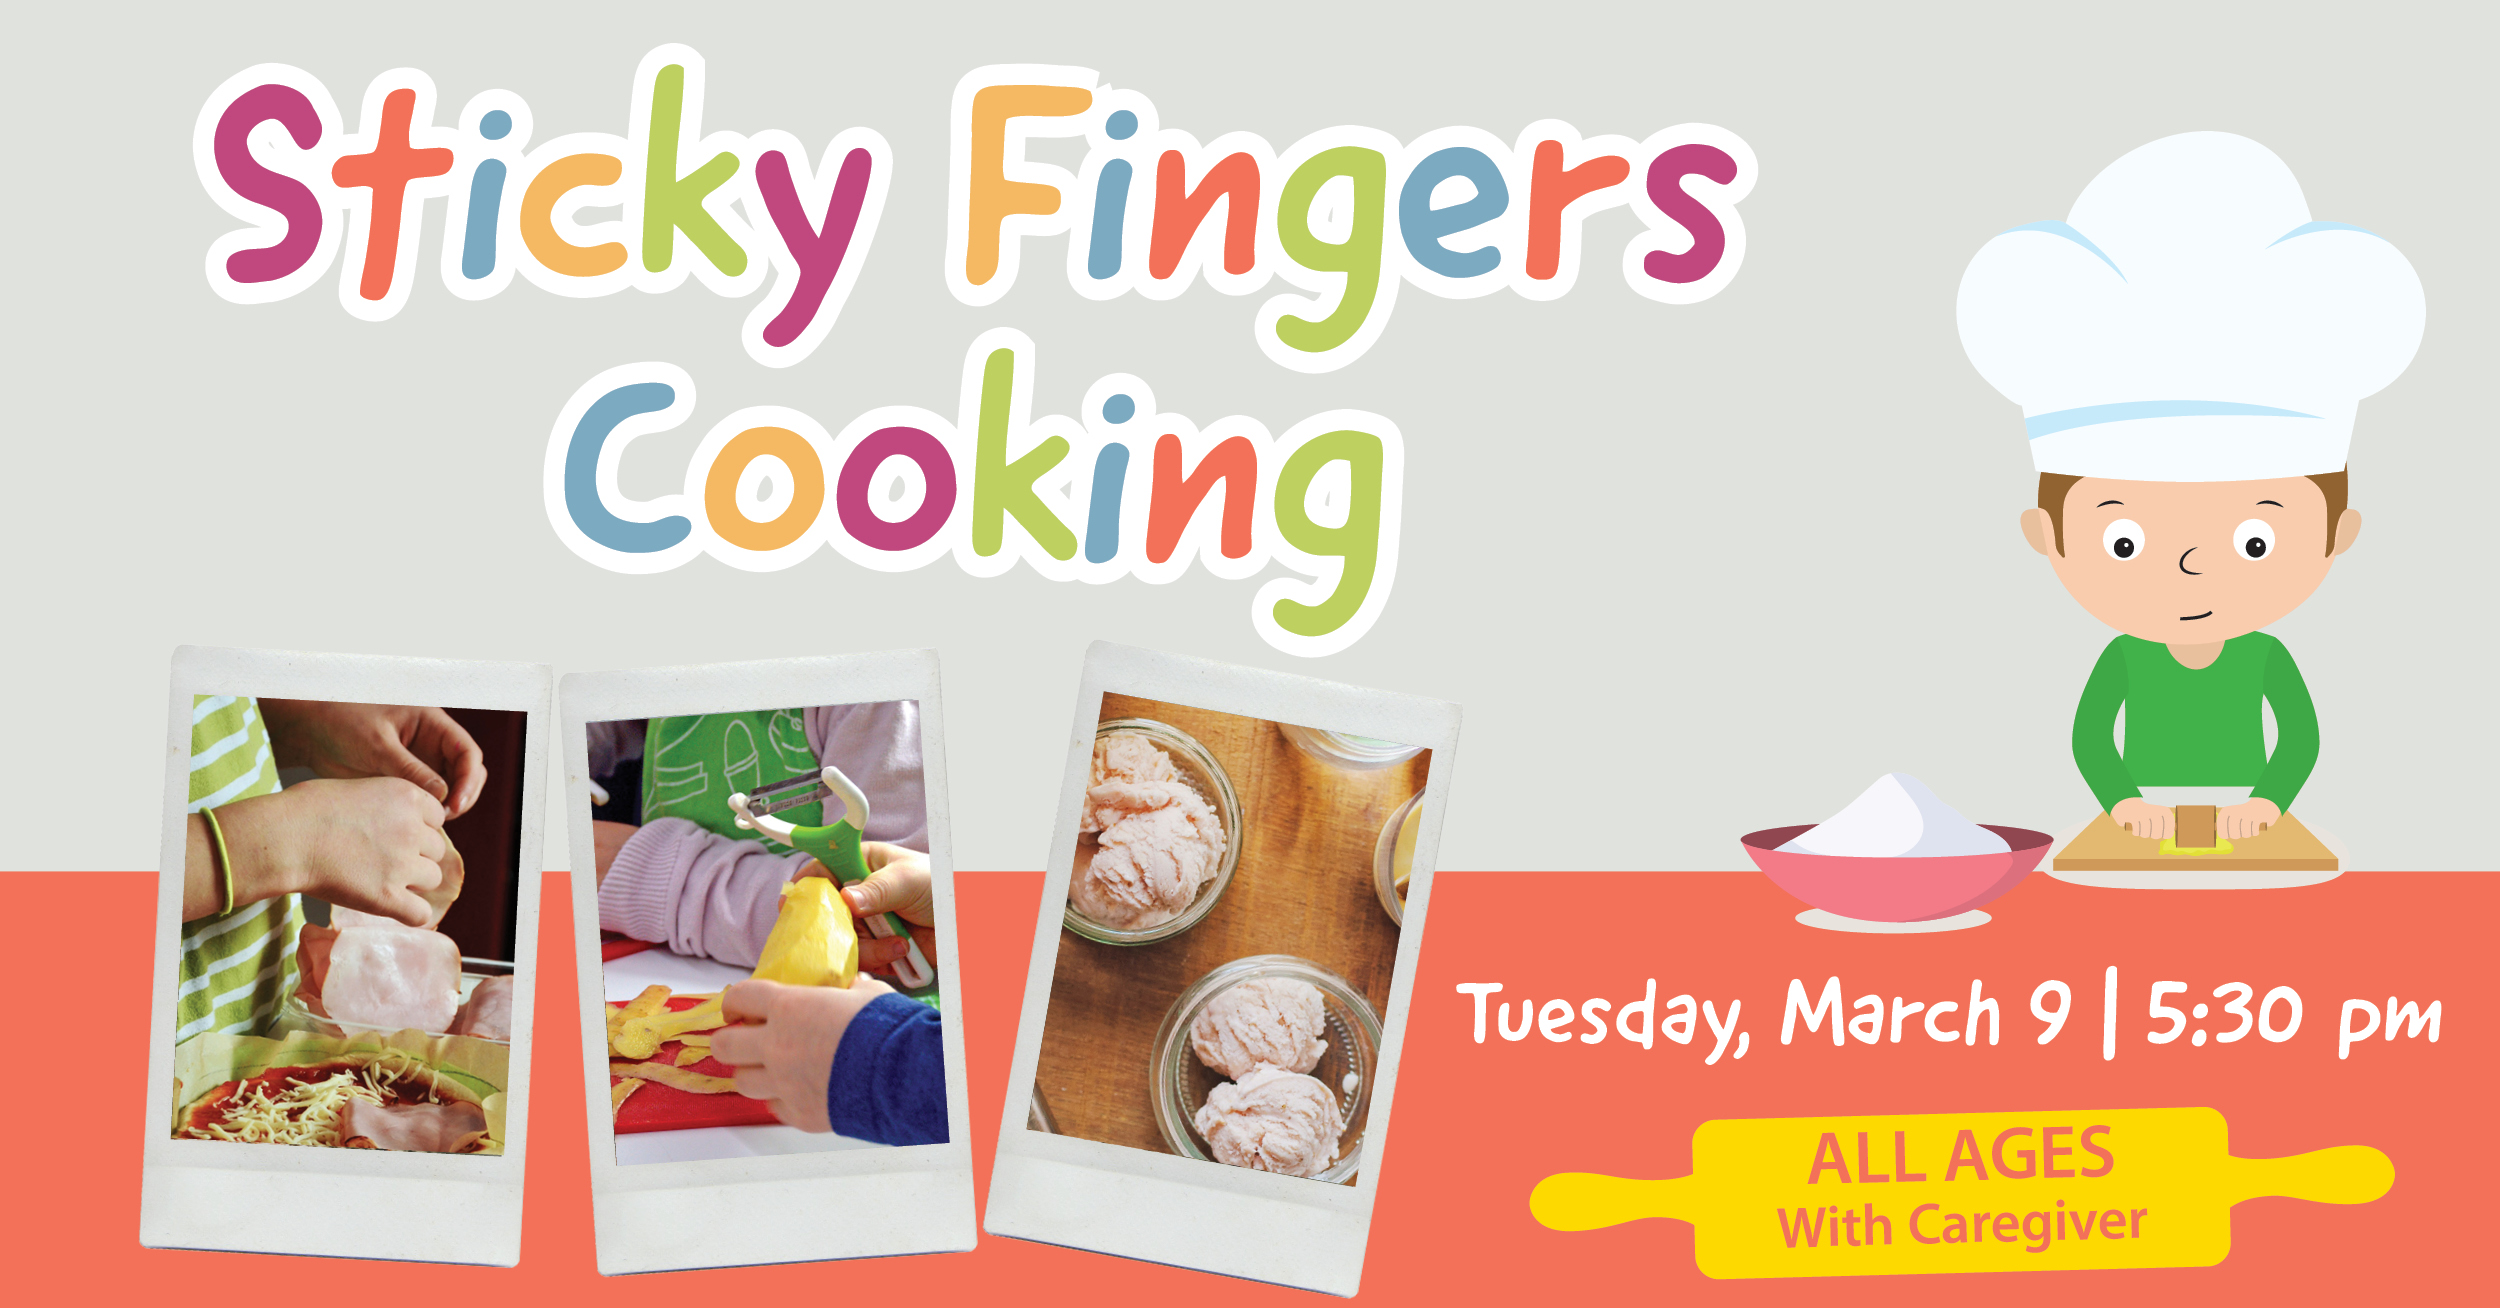 Sticky Fingers Cooking. Tuesday, March 9 at 5:30pm. All Ages with caregiver